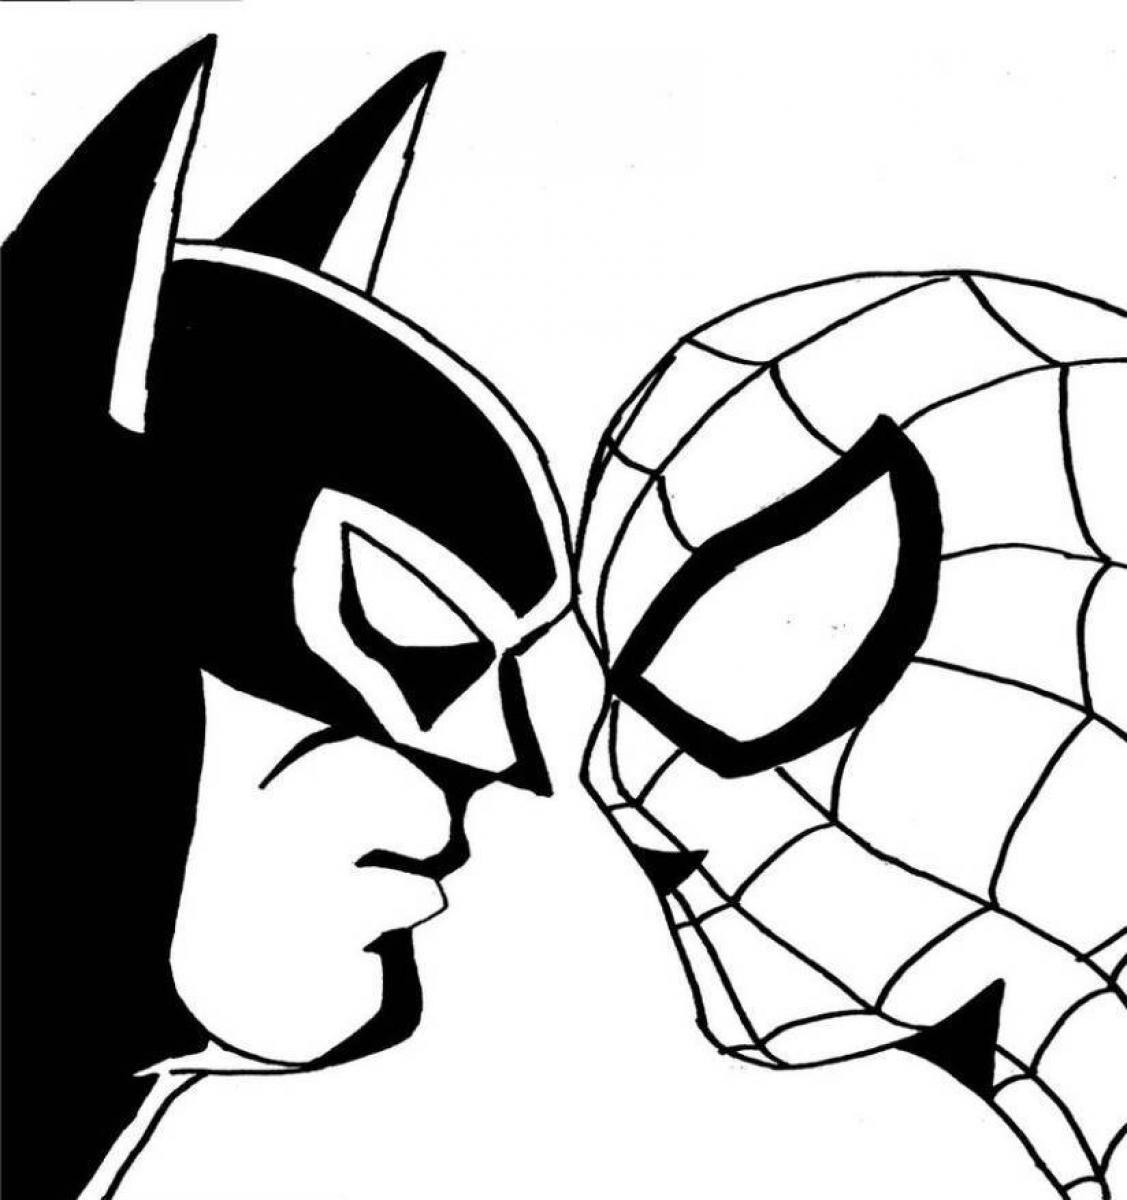 Batman Coloring Pages For Kids  Adults  Storiespubcom Learn With Fun